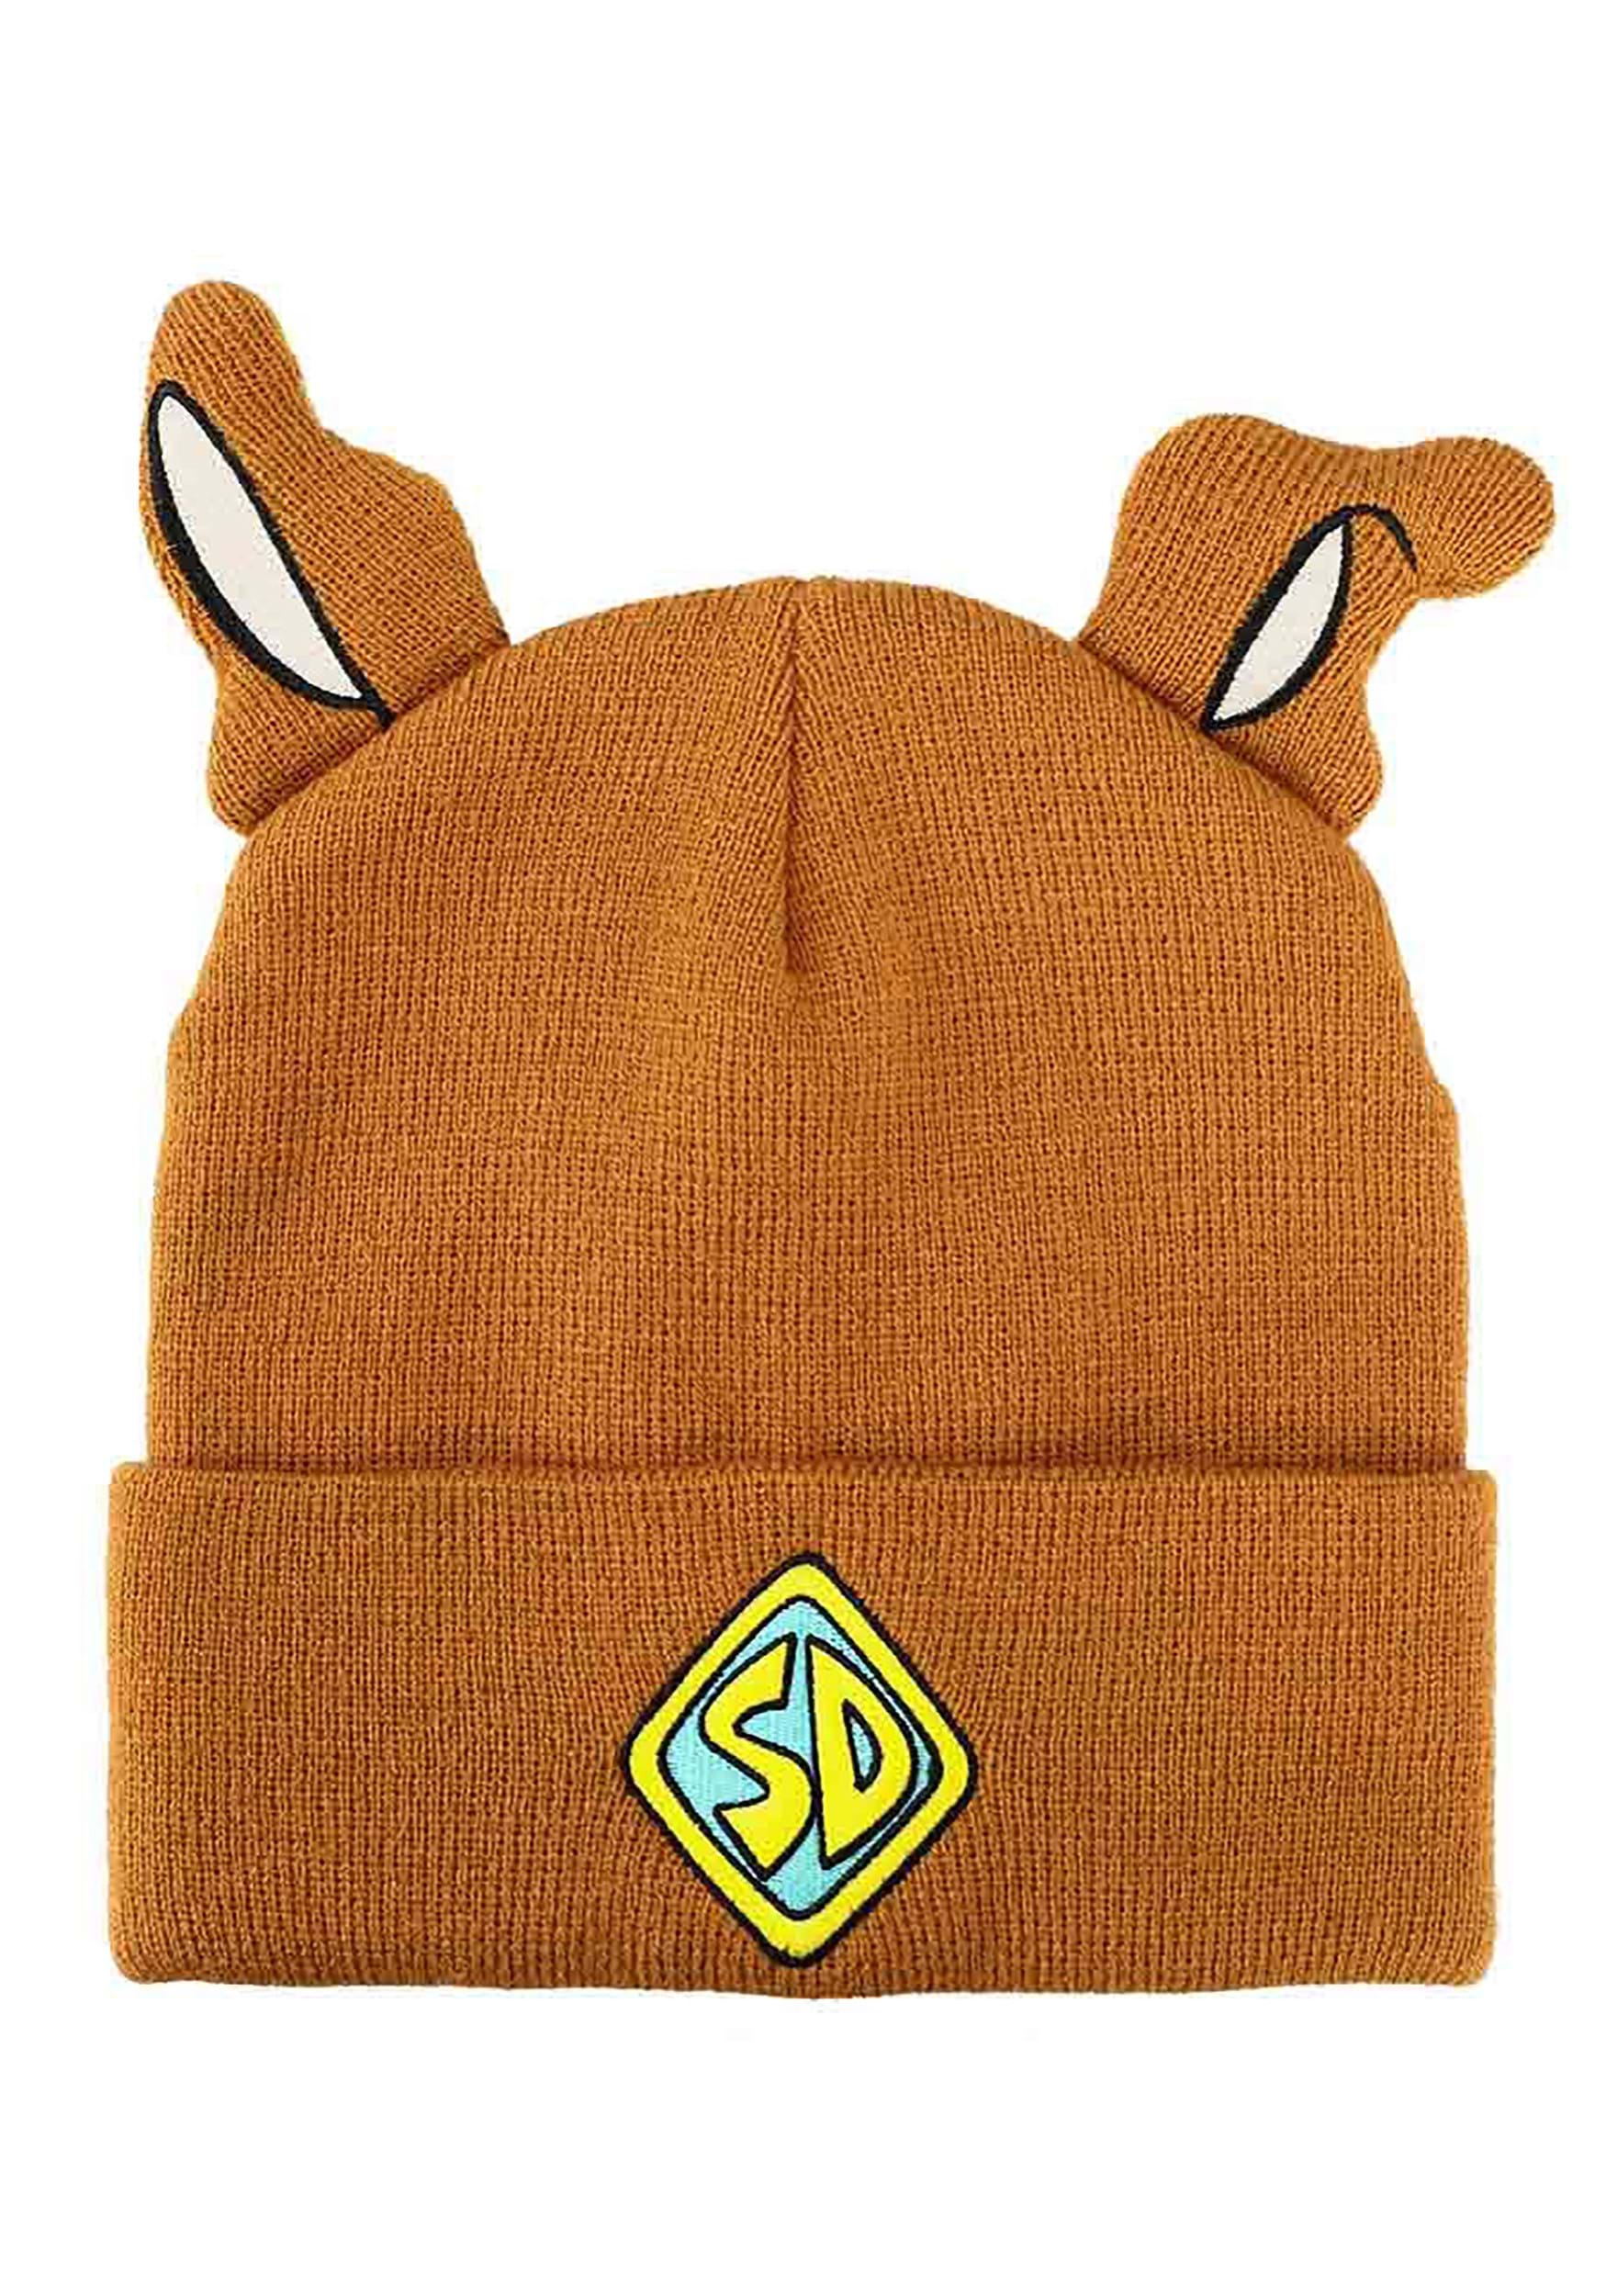 3D Scooby Doo Plush Ears Embroidered Beanie